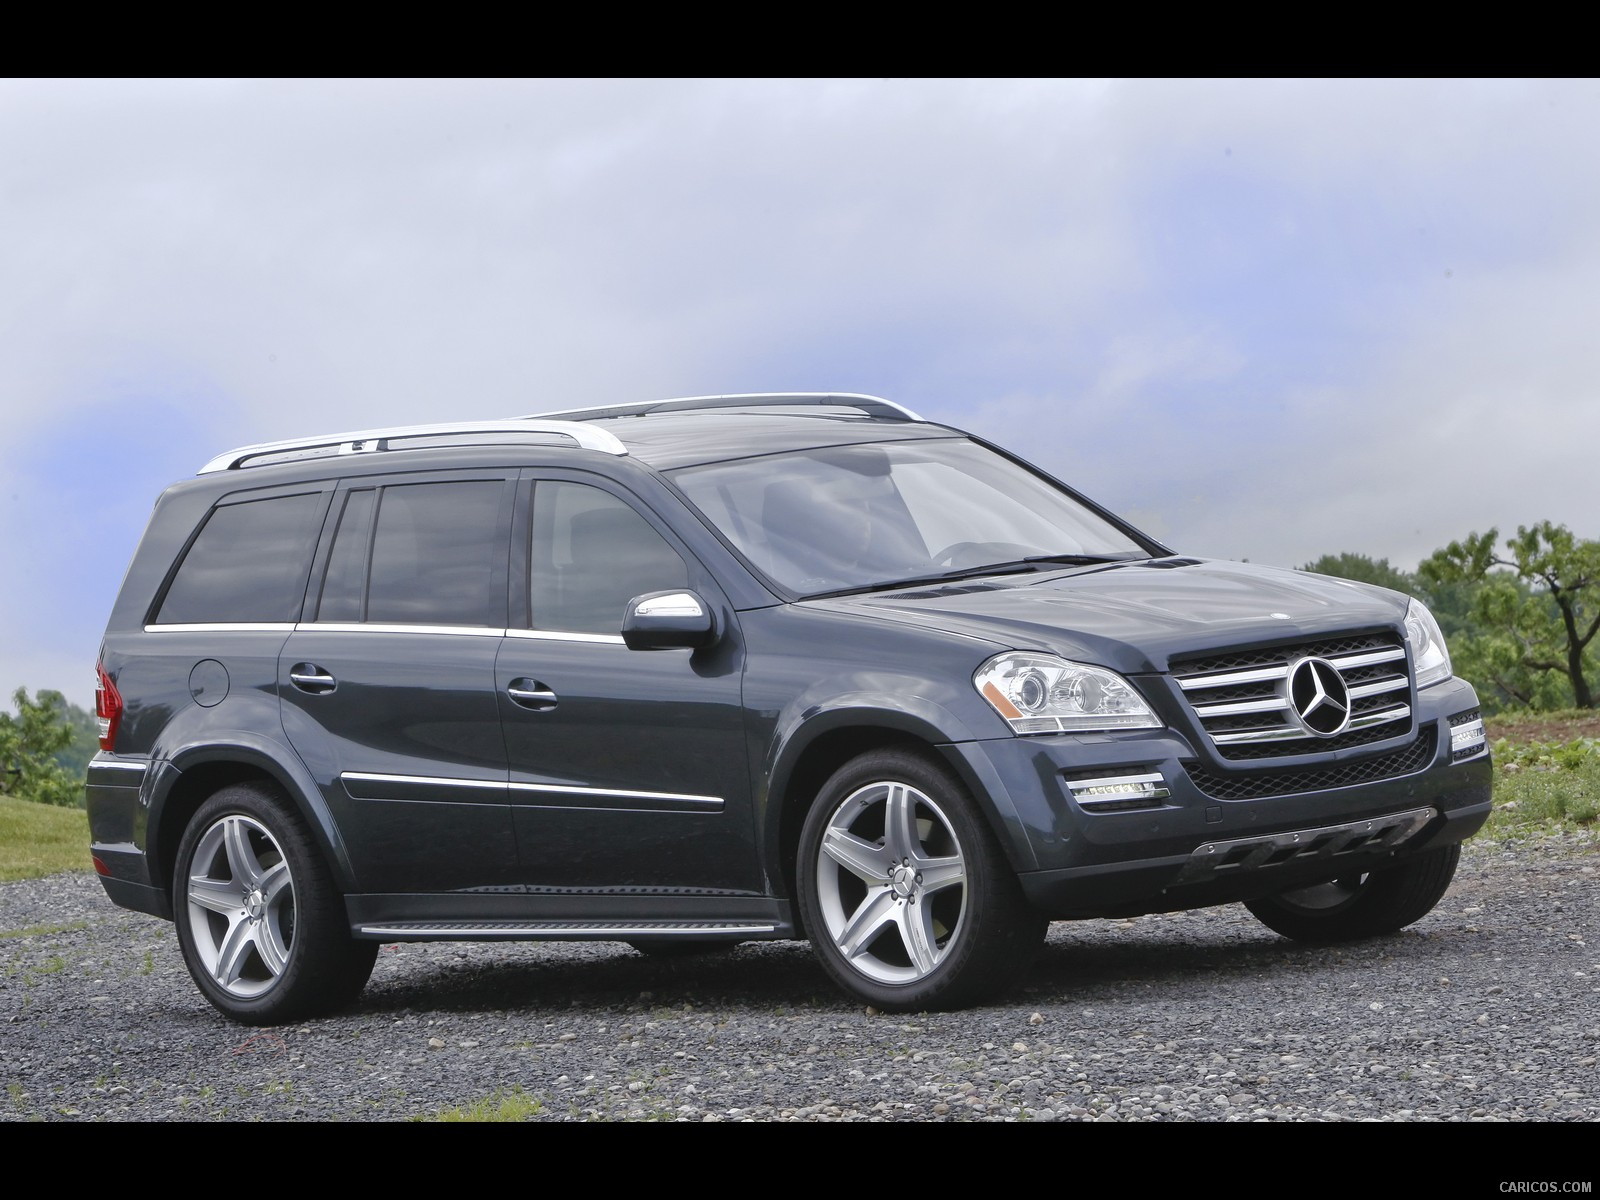 2010 Mercedes-Benz GL550 - Front, #38 of 112